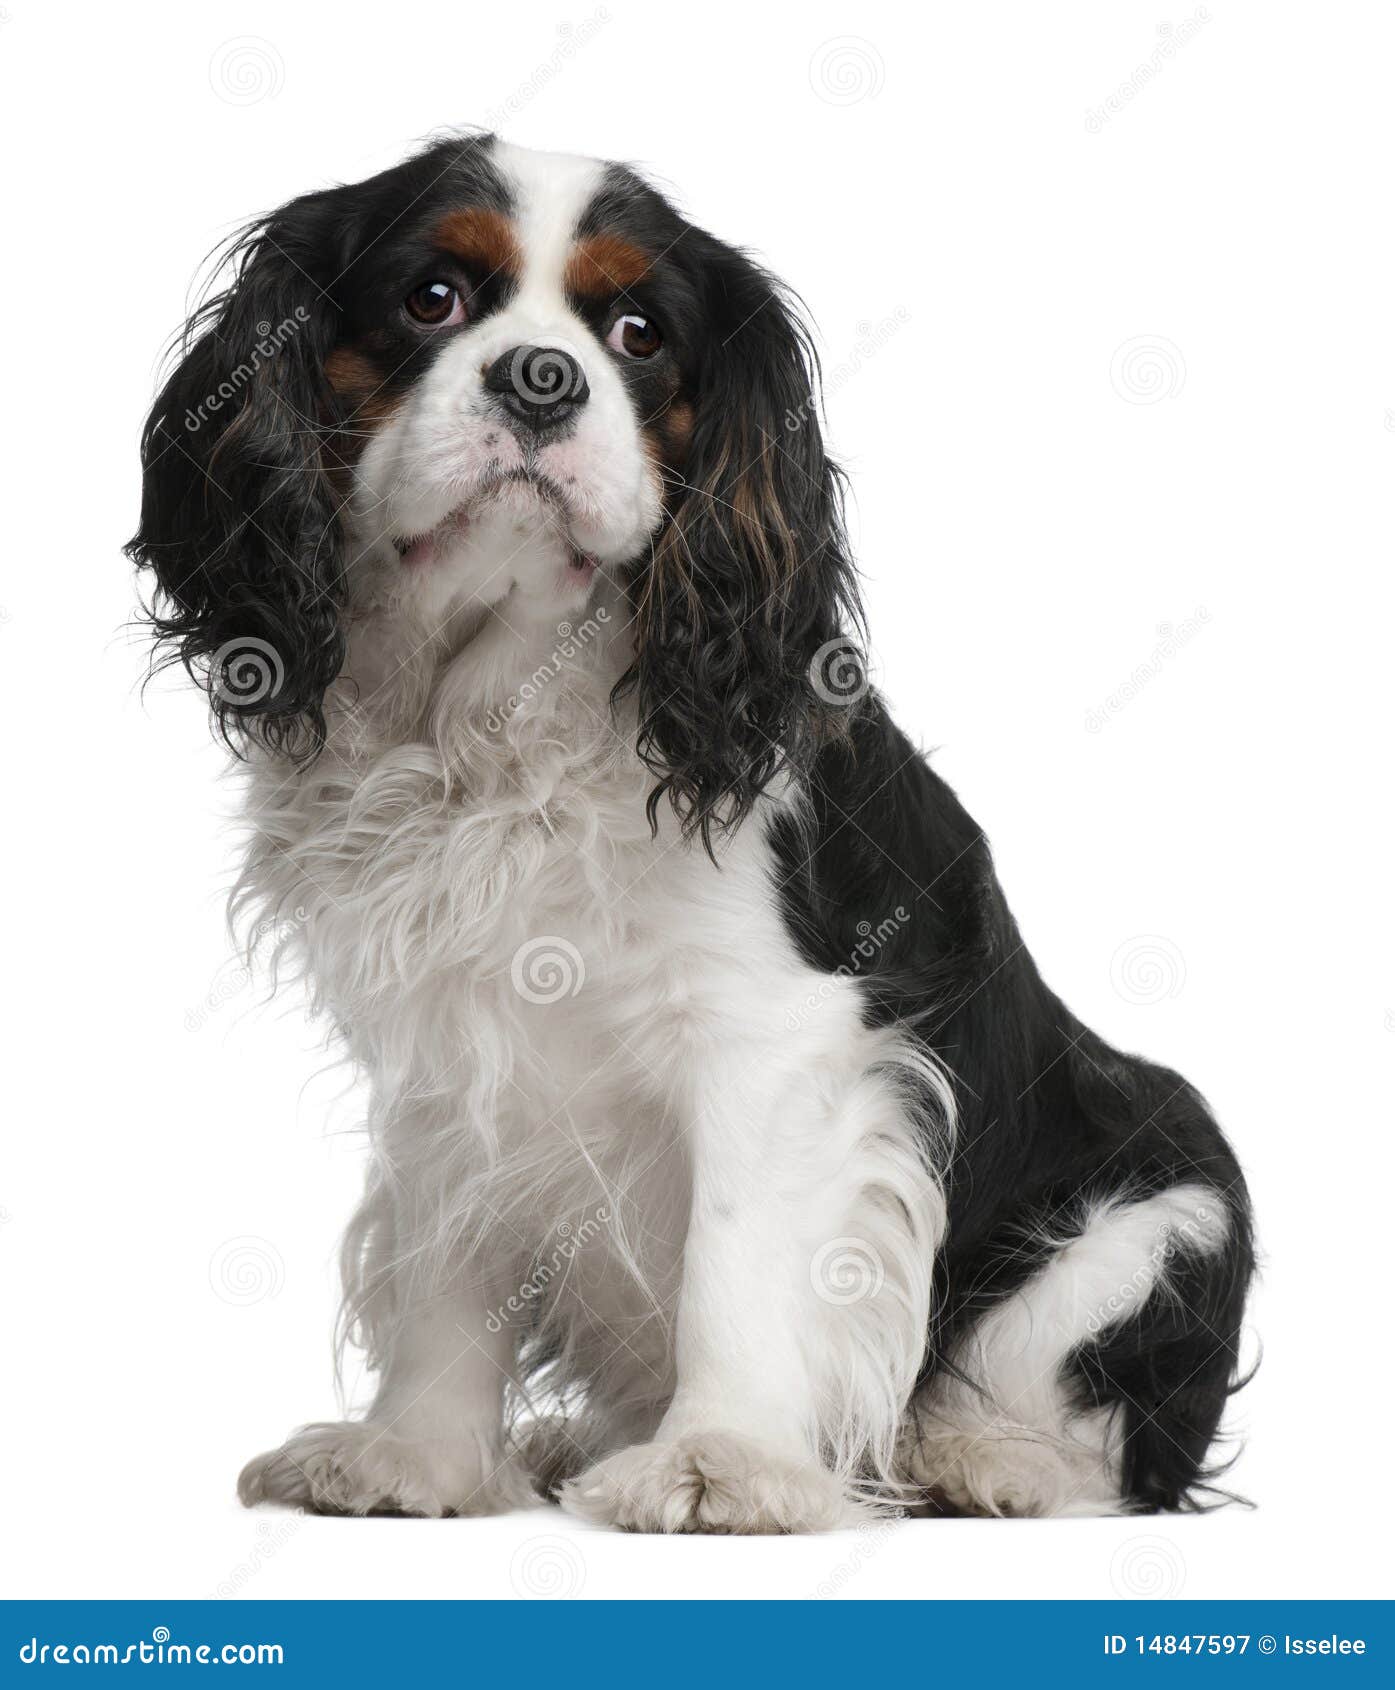 List 103+ Images how to get a king charles spaniels drink water Sharp